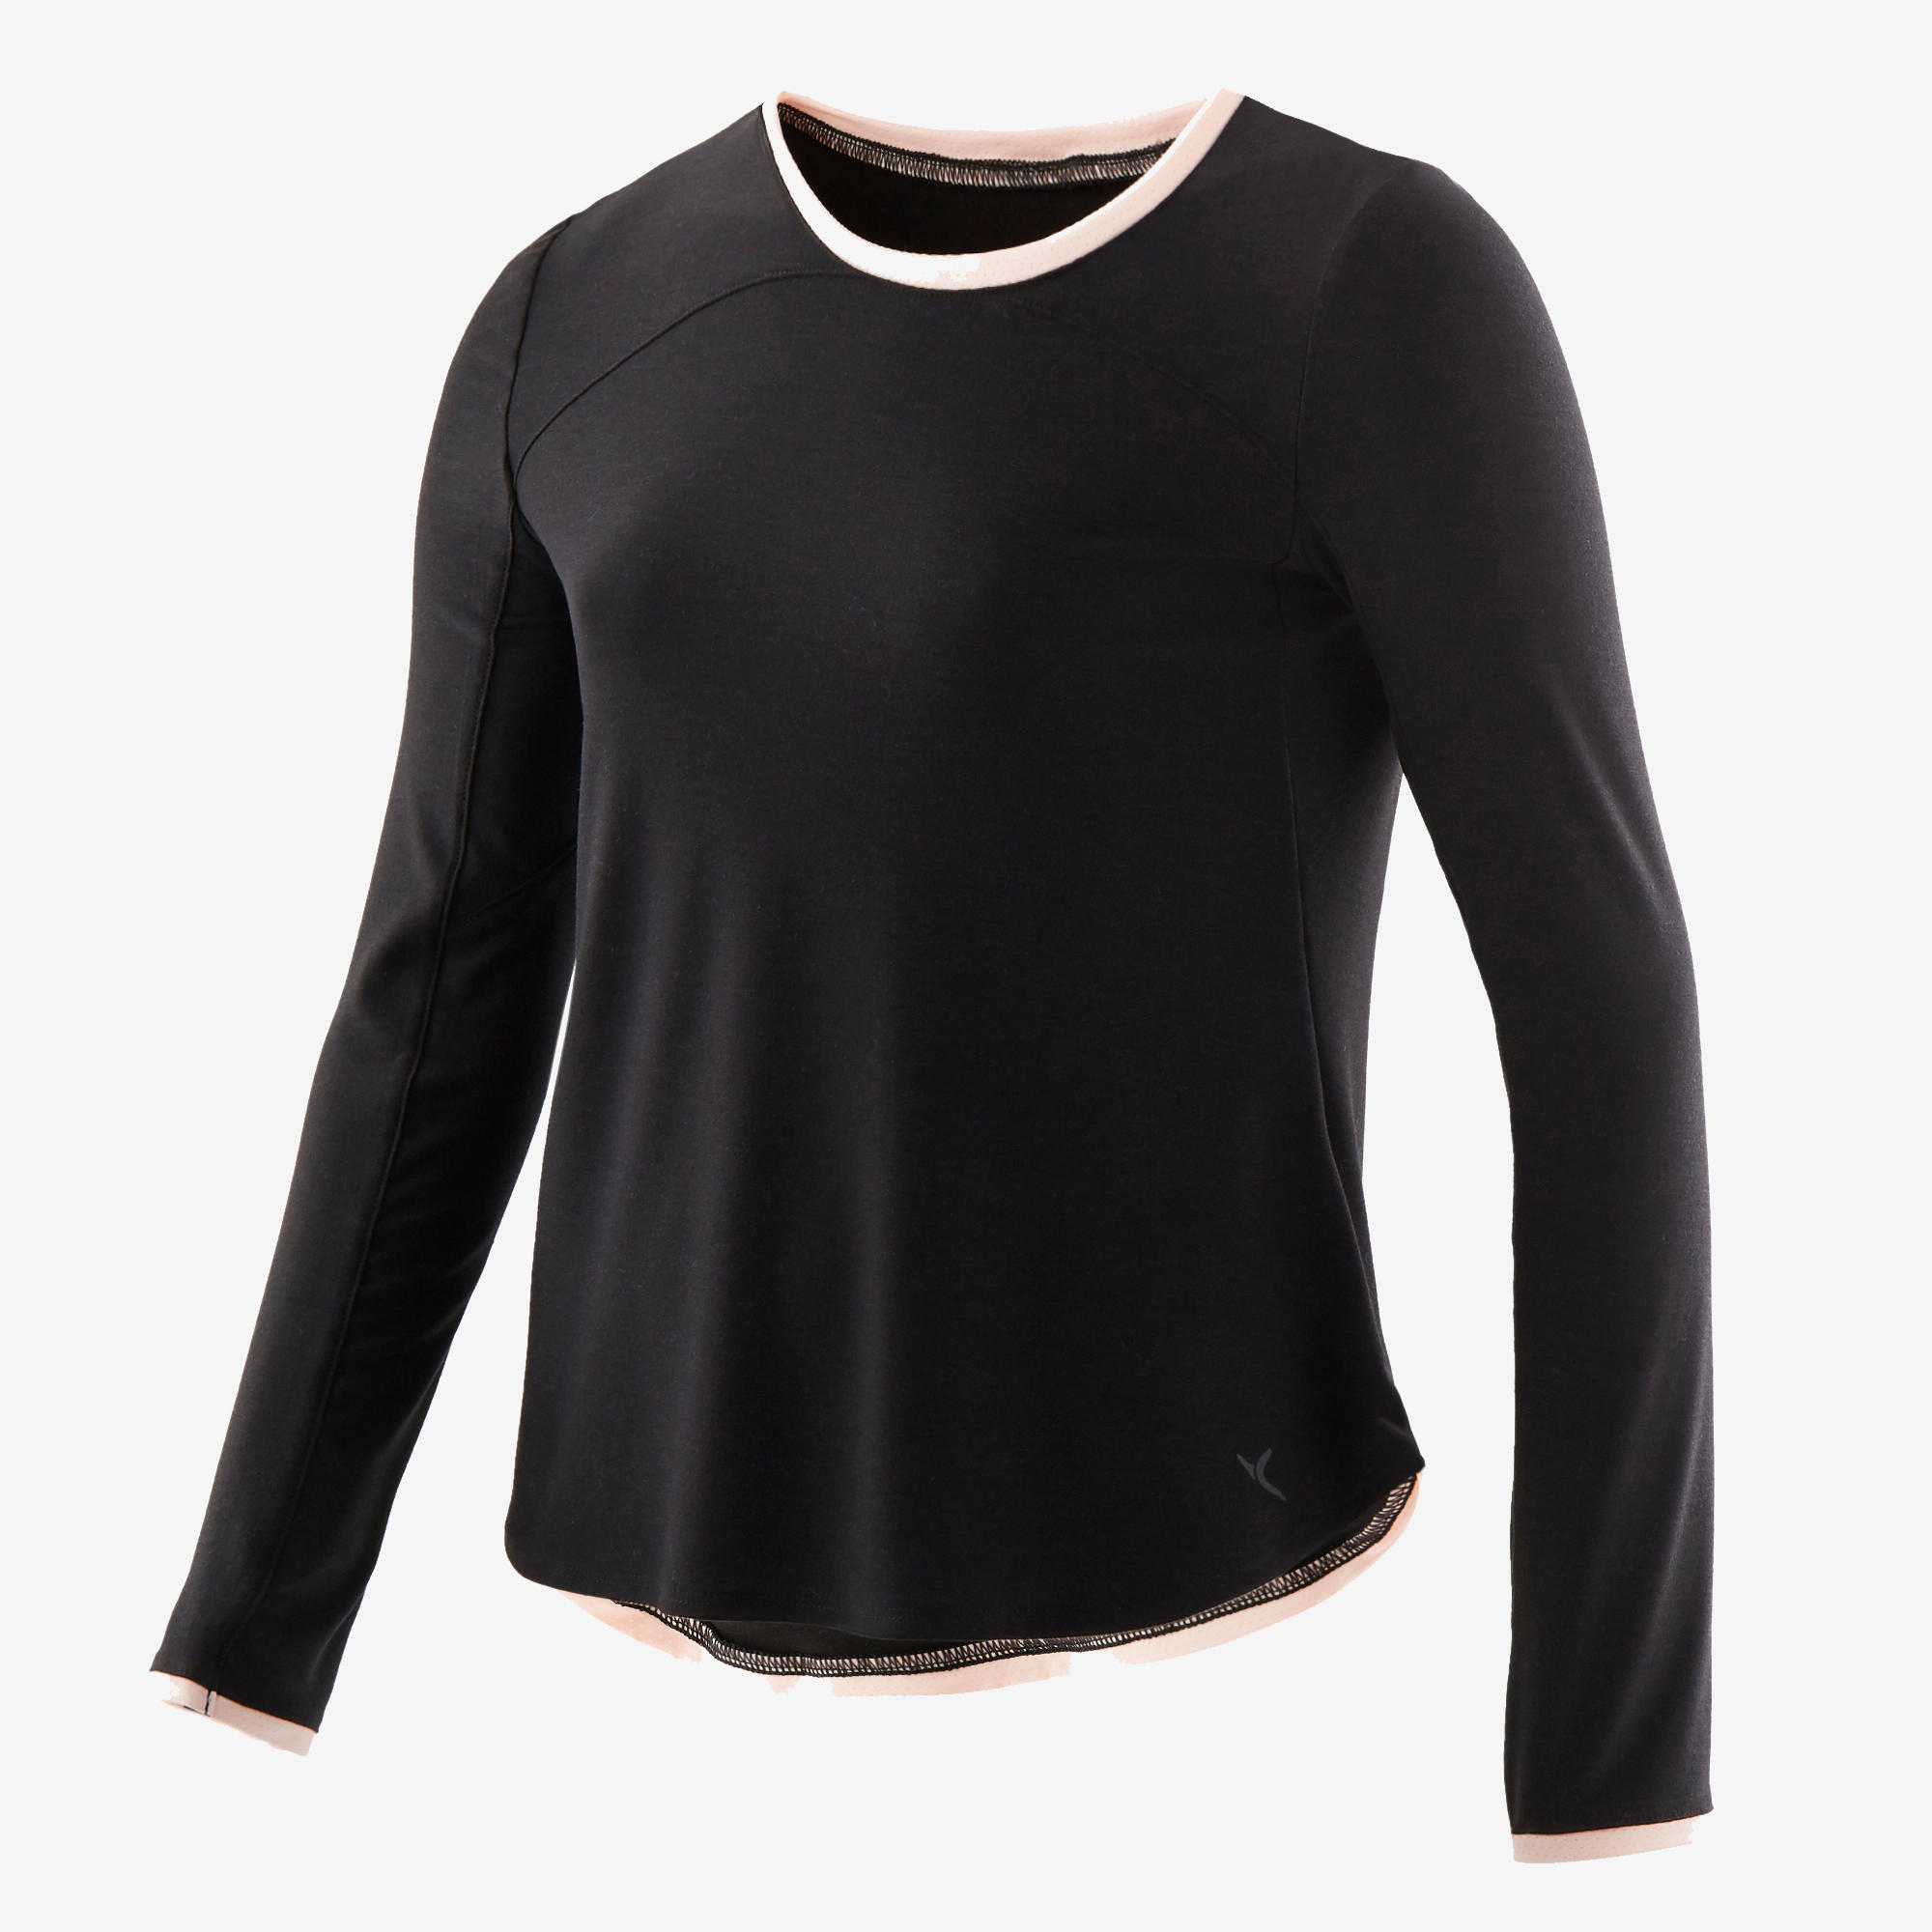 Kids' Long-Sleeved Breathable Cotton Gym T-Shirt 500 - Black/Pink 2/6